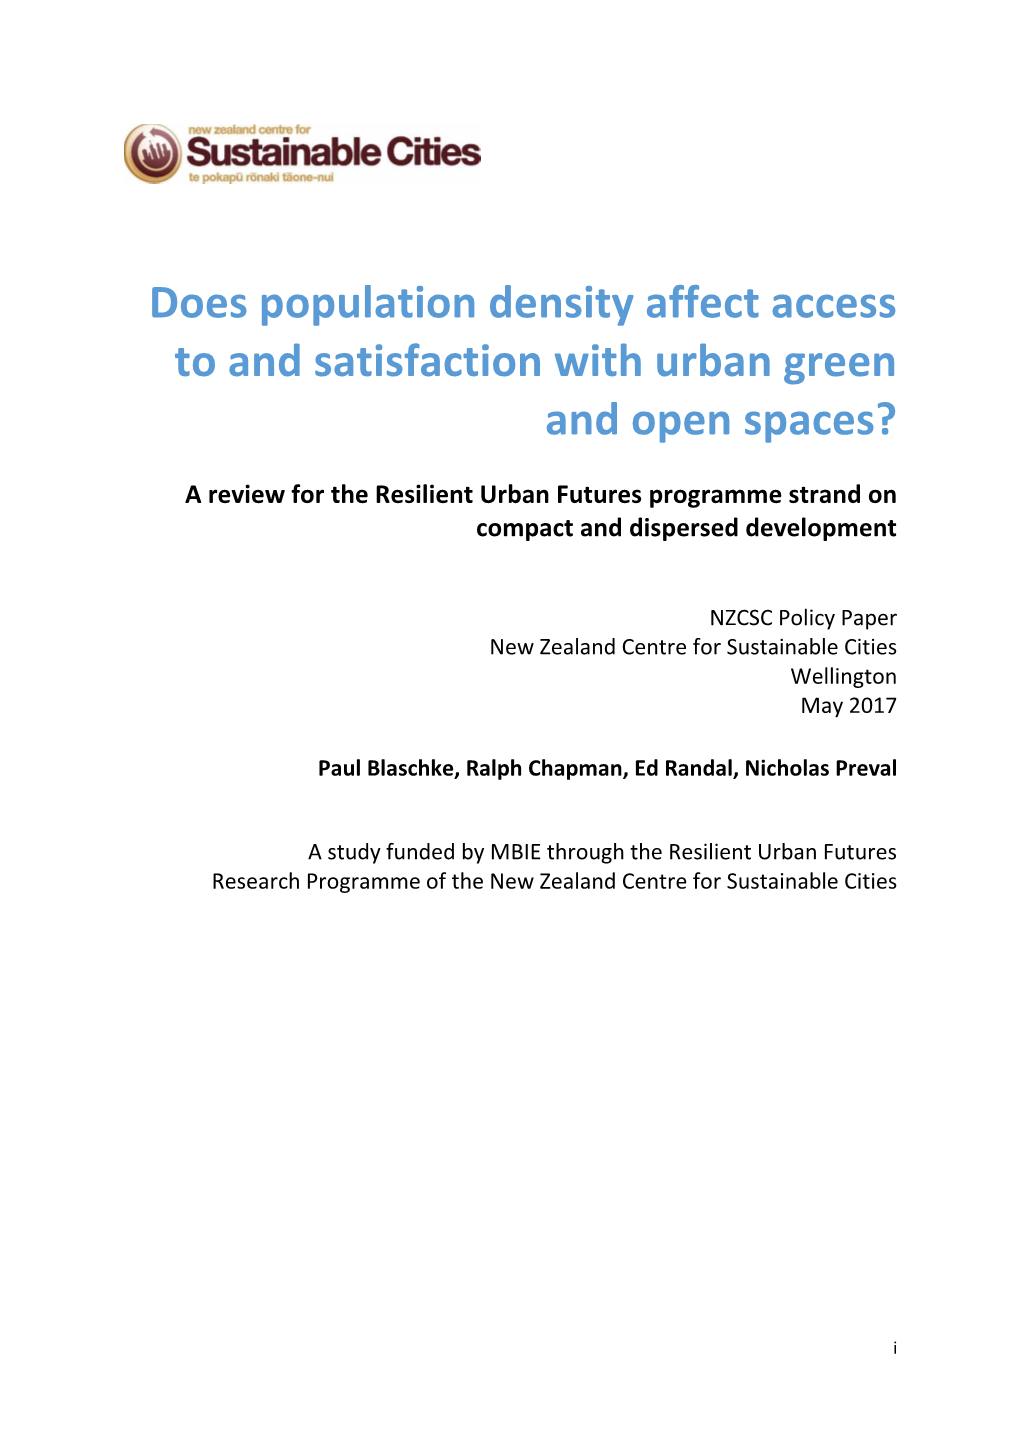 Does Population Density Affect Access to and Satisfaction with Urban Green and Open Spaces?